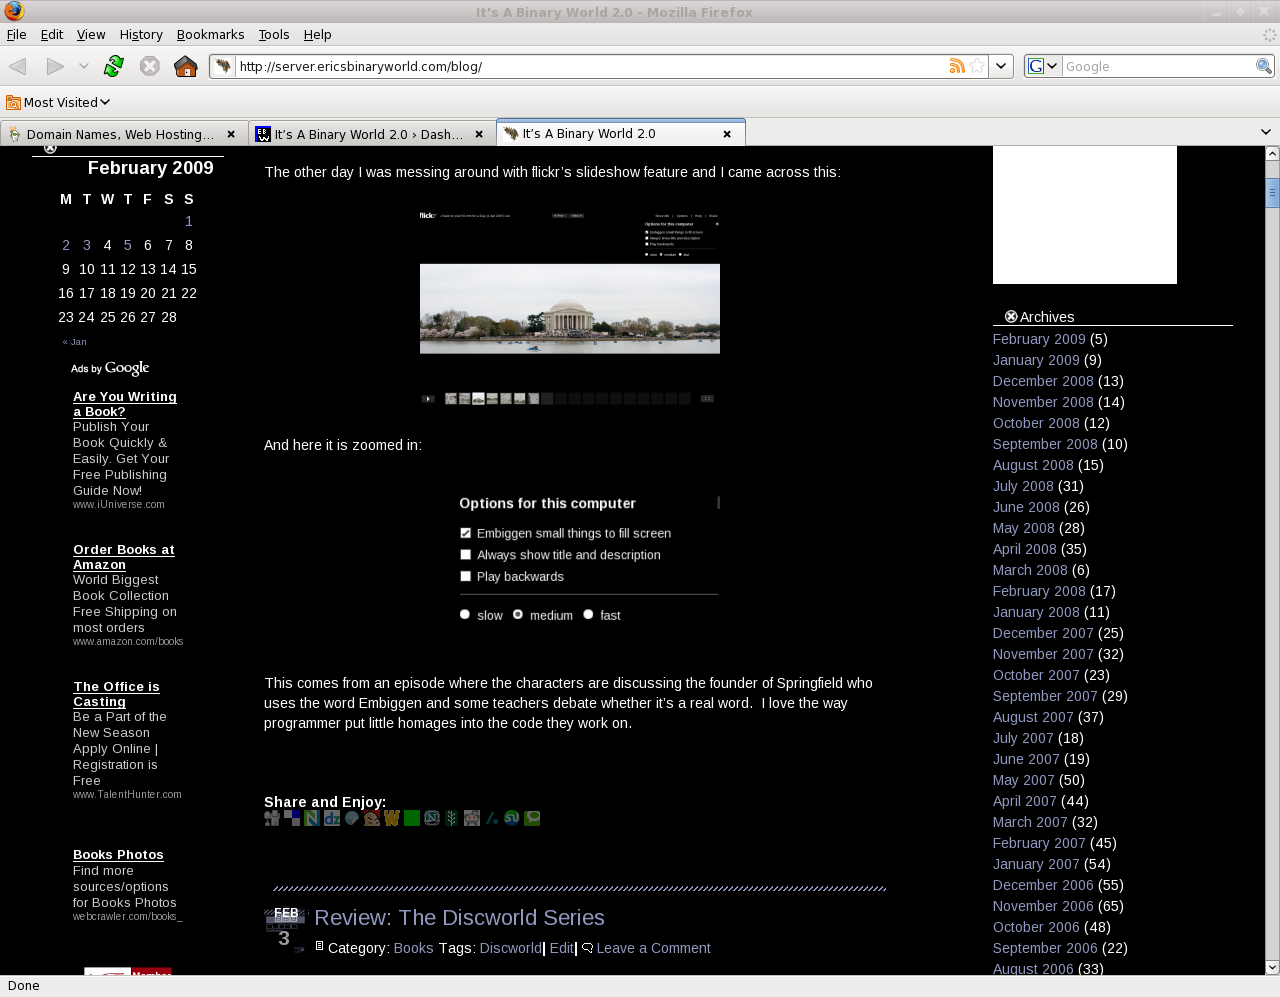 Screenshot of my blog in a web browser